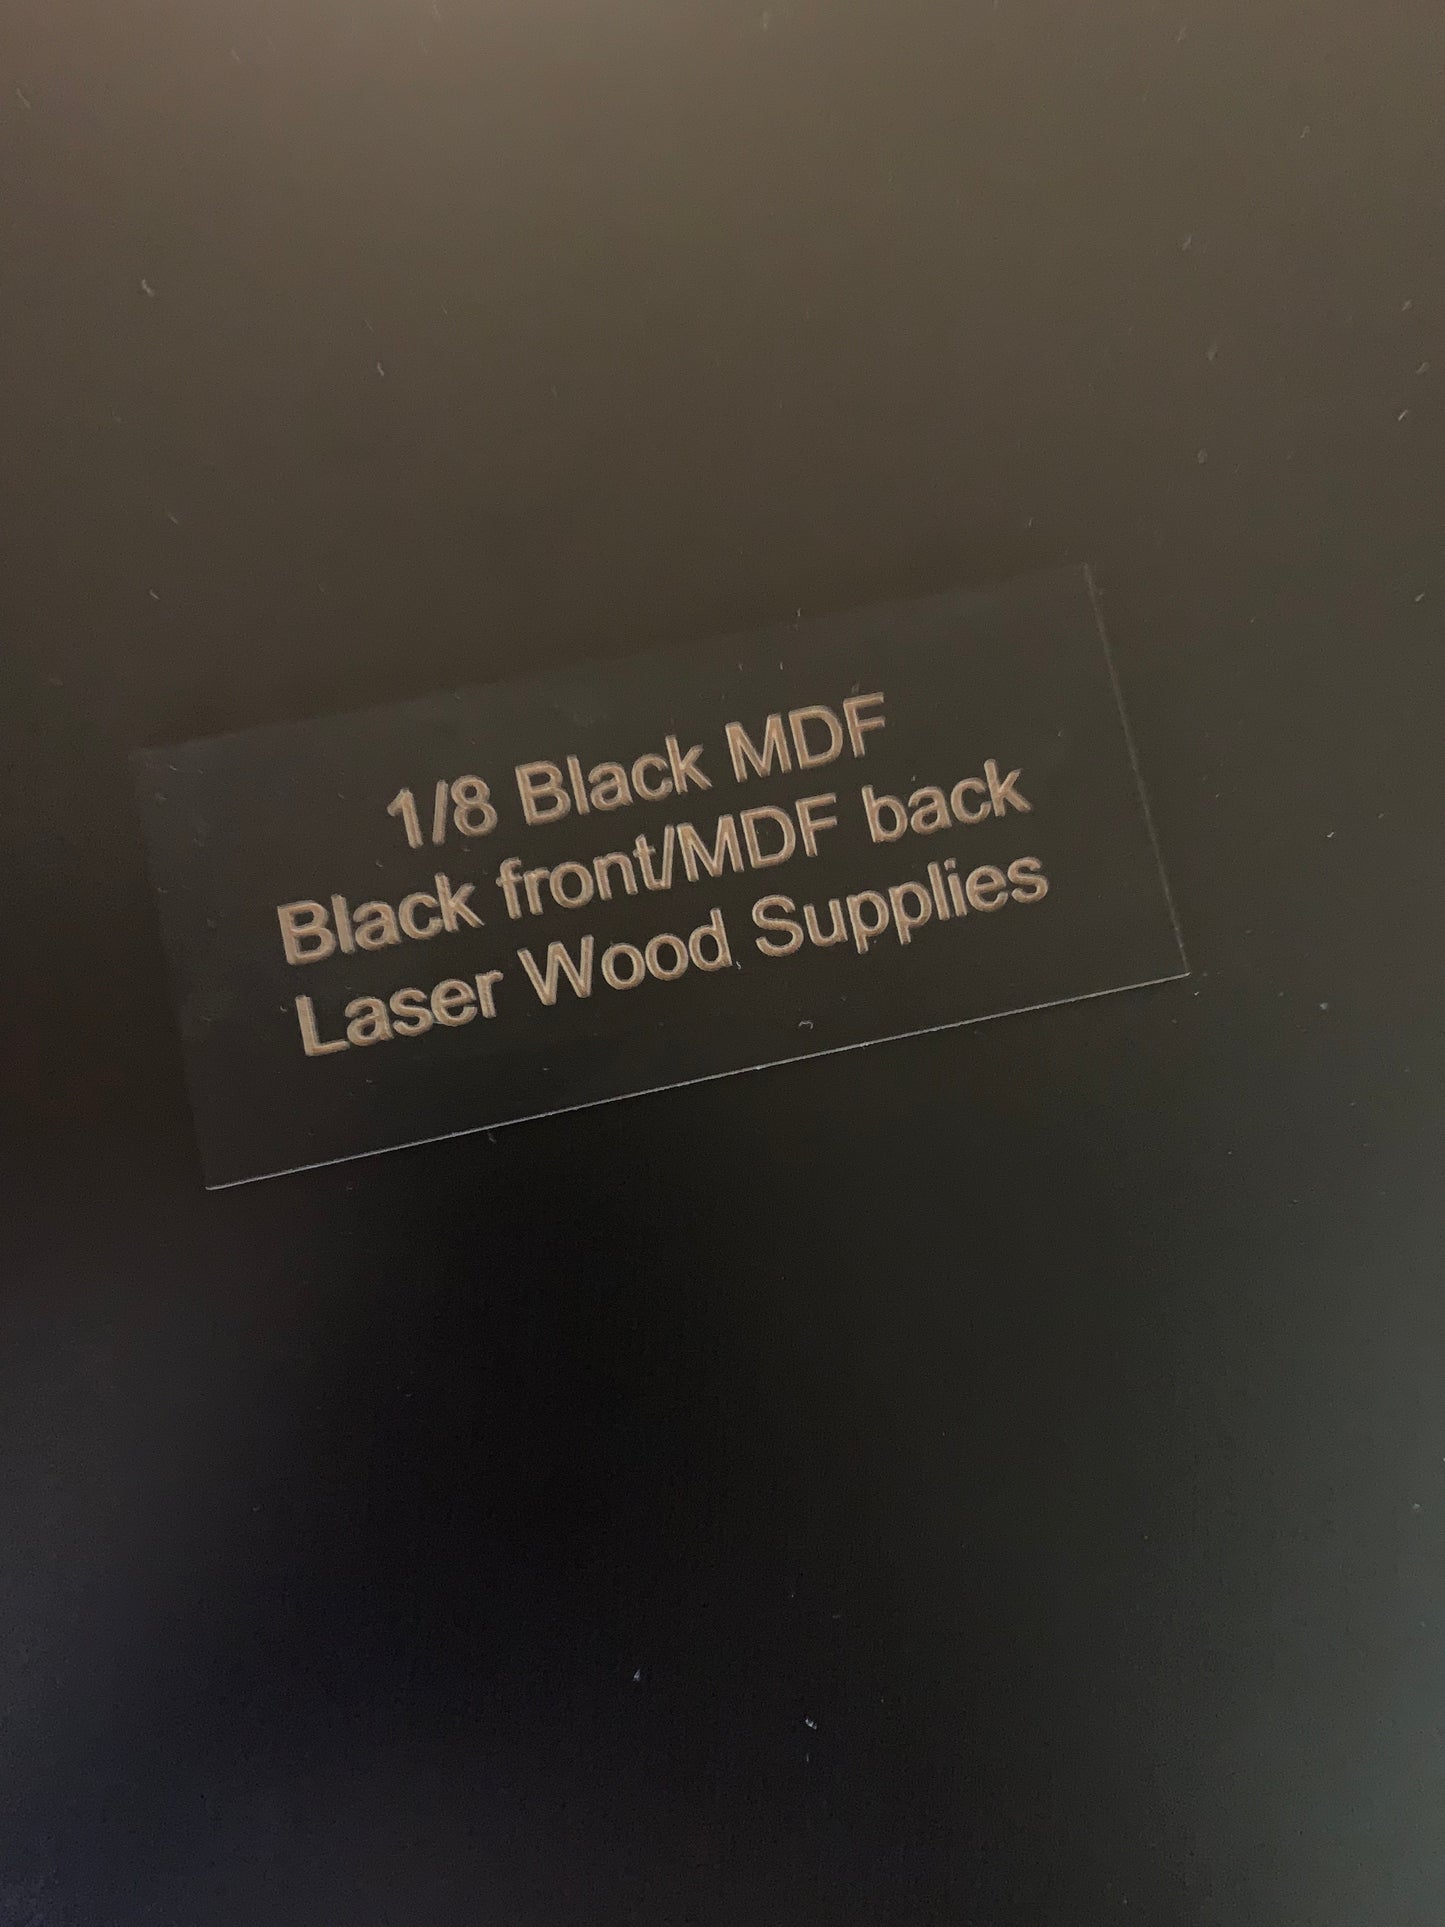 BLACK MDF, 1/8 MDF painted black/ Perfect for Glowforge or other CO2 Lasers